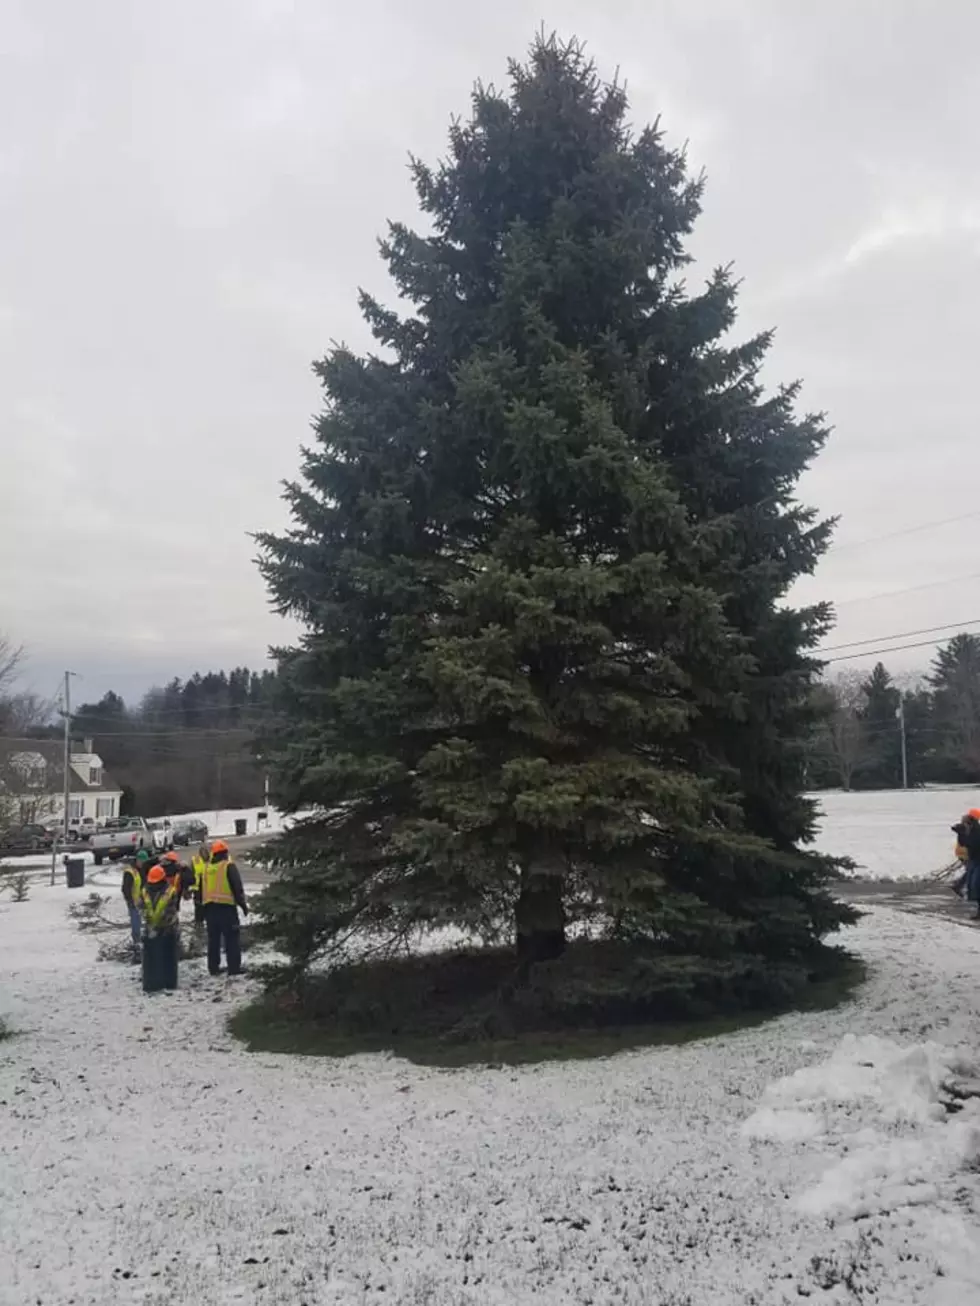 NYS Empire Plaza Christmas Tree is From Sharon Springs